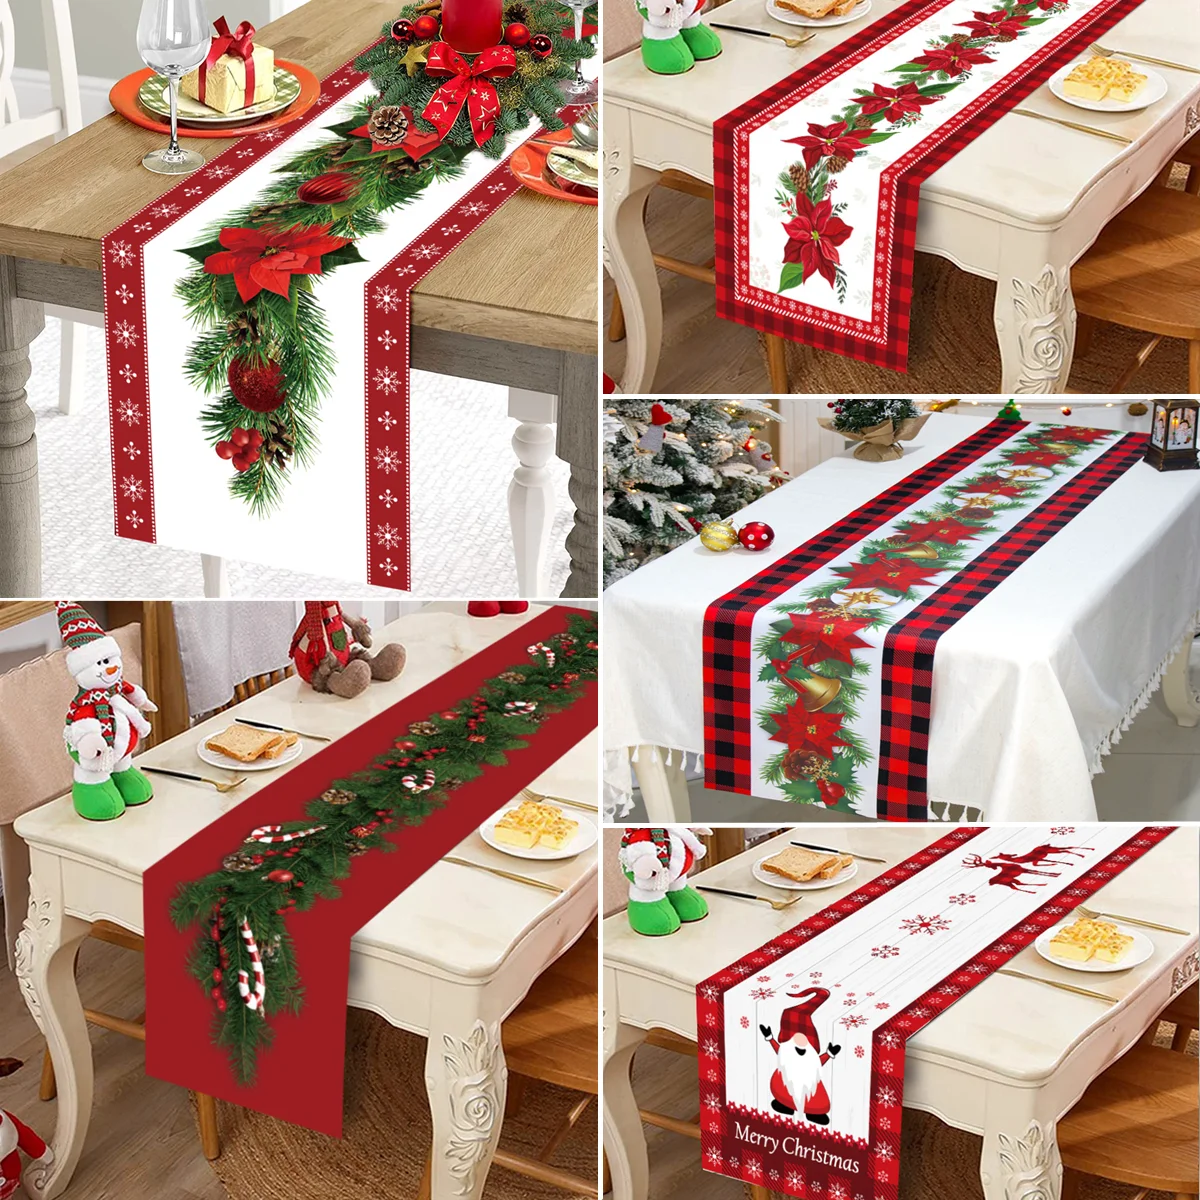 7Christmas Tree Pine Needles Safflower Table Runner Wedding Decor Table Cover Christmas Decoration Holiday Party Tablecloth